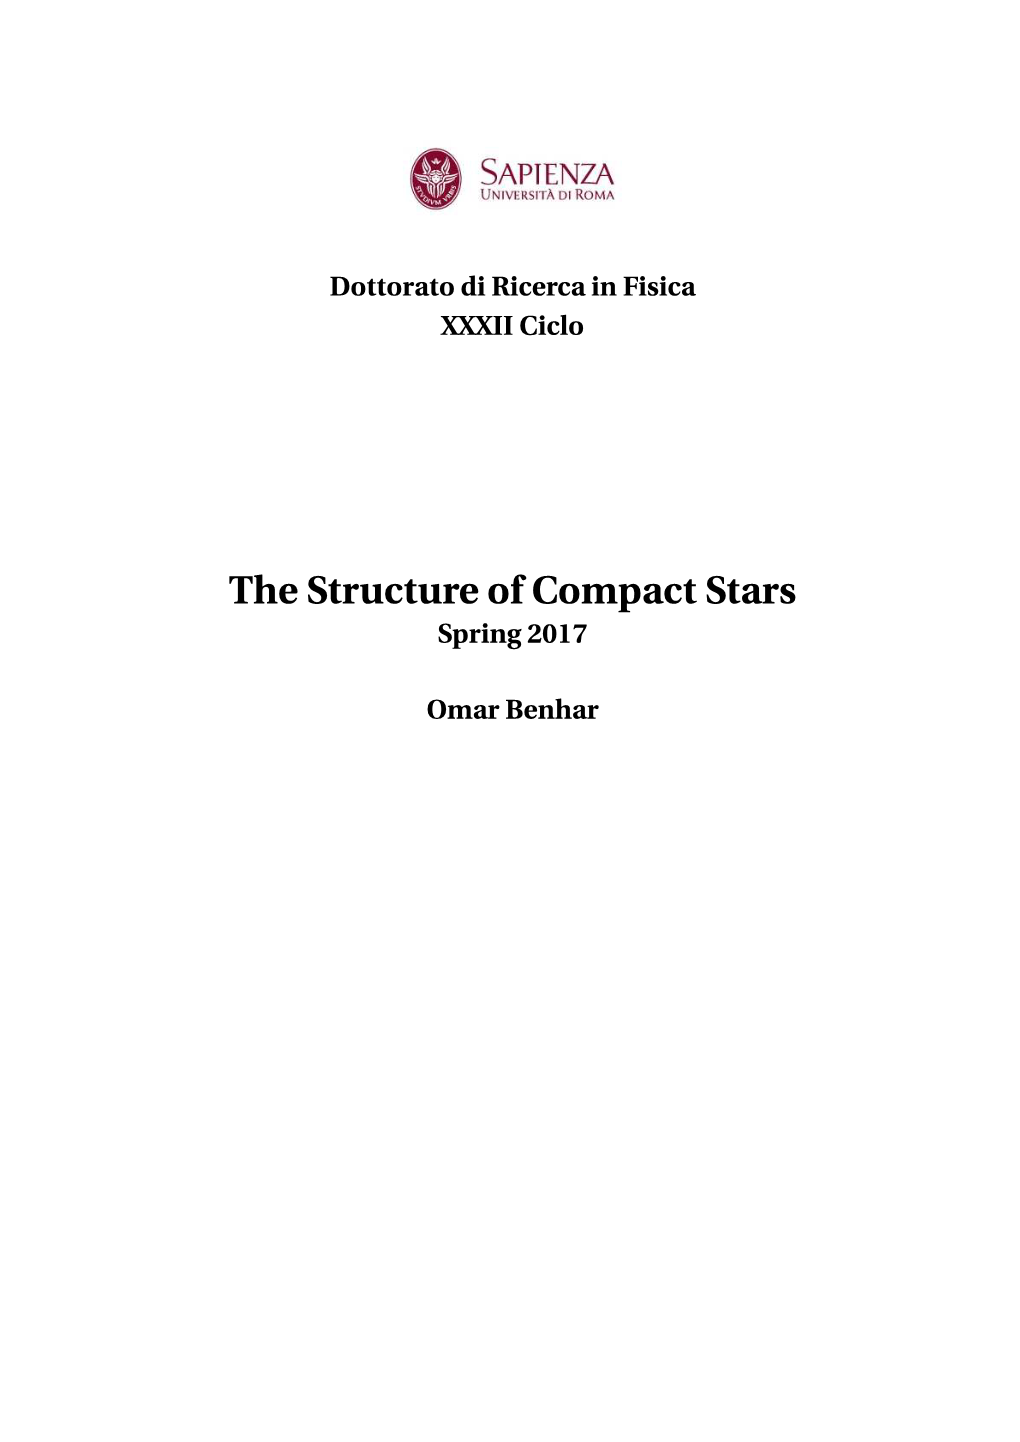 The Structure of Compact Stars Spring 2017